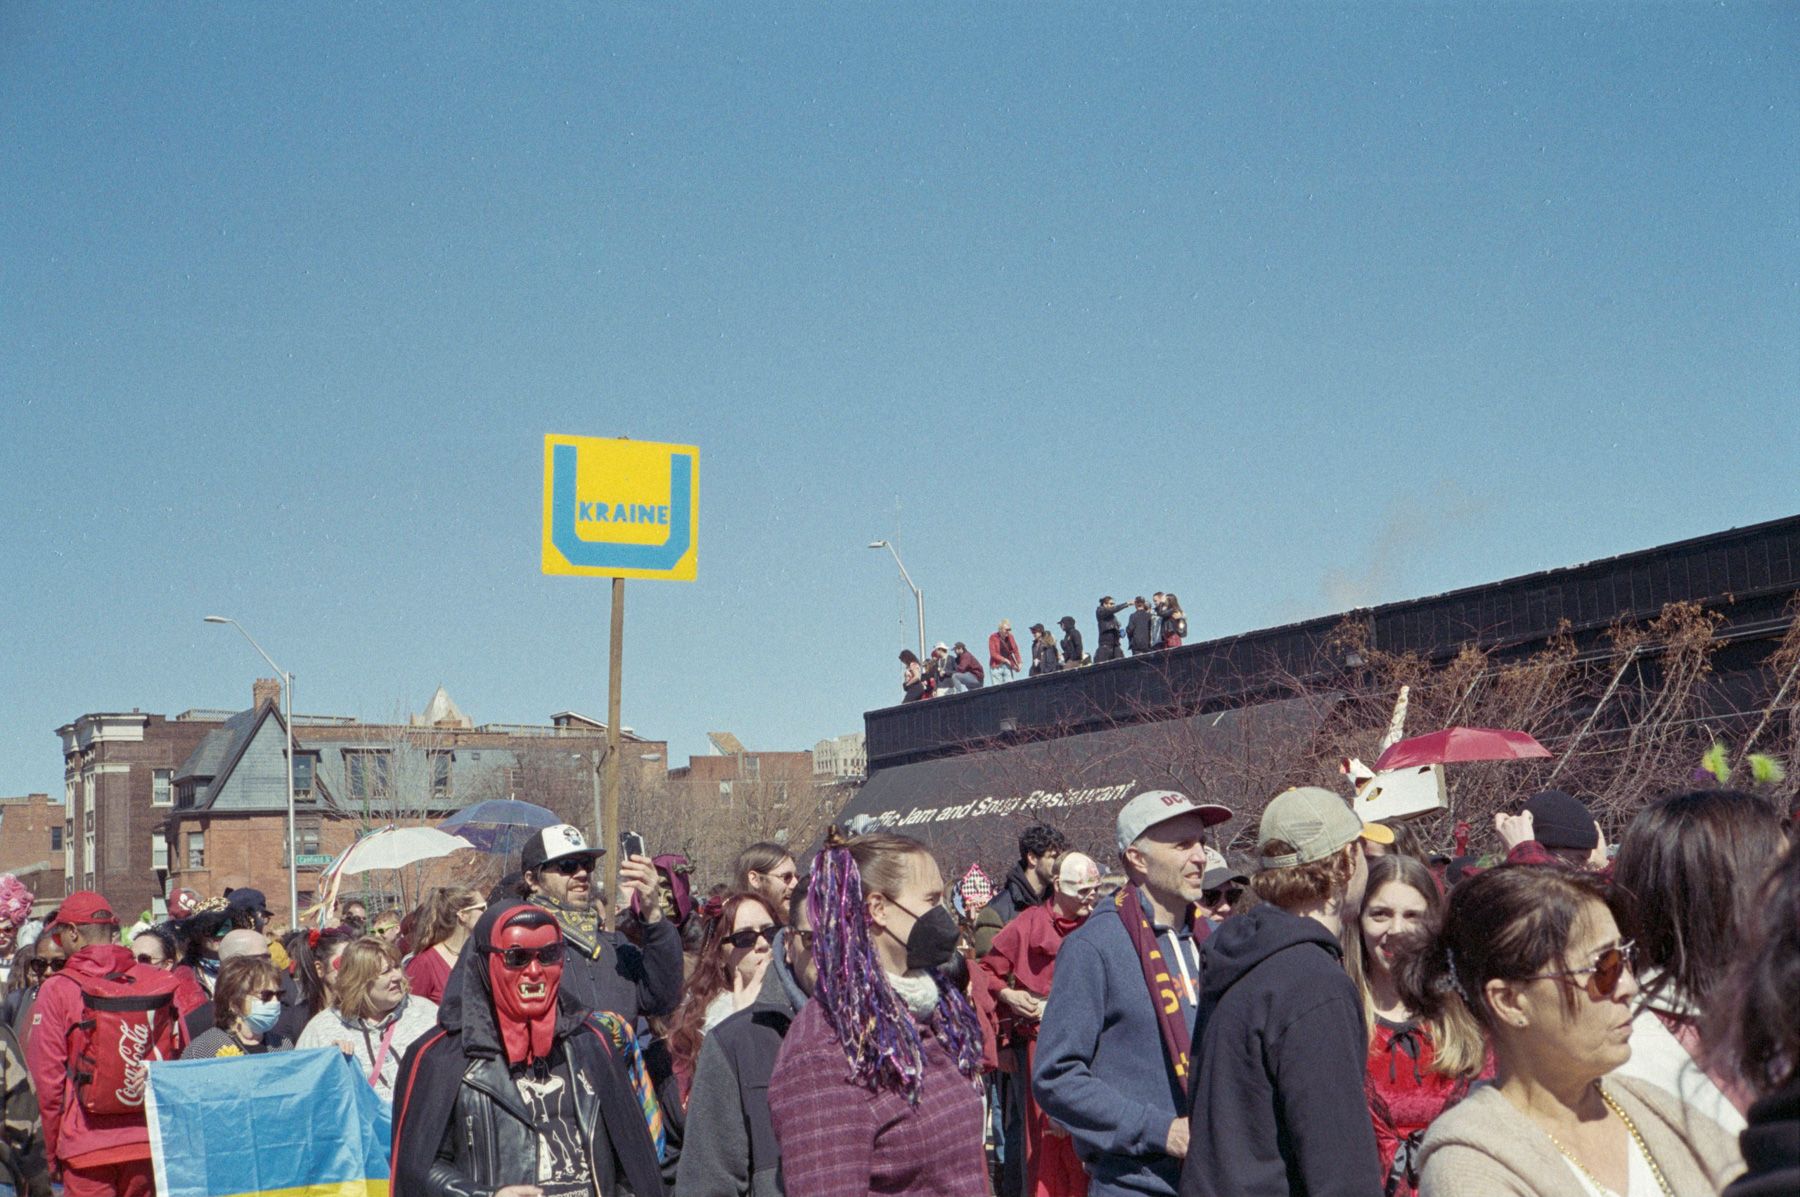 Marche du Nain Rouge marchers, Ukranian flag and sign, watchers on rooftop in background, clear blue sky.